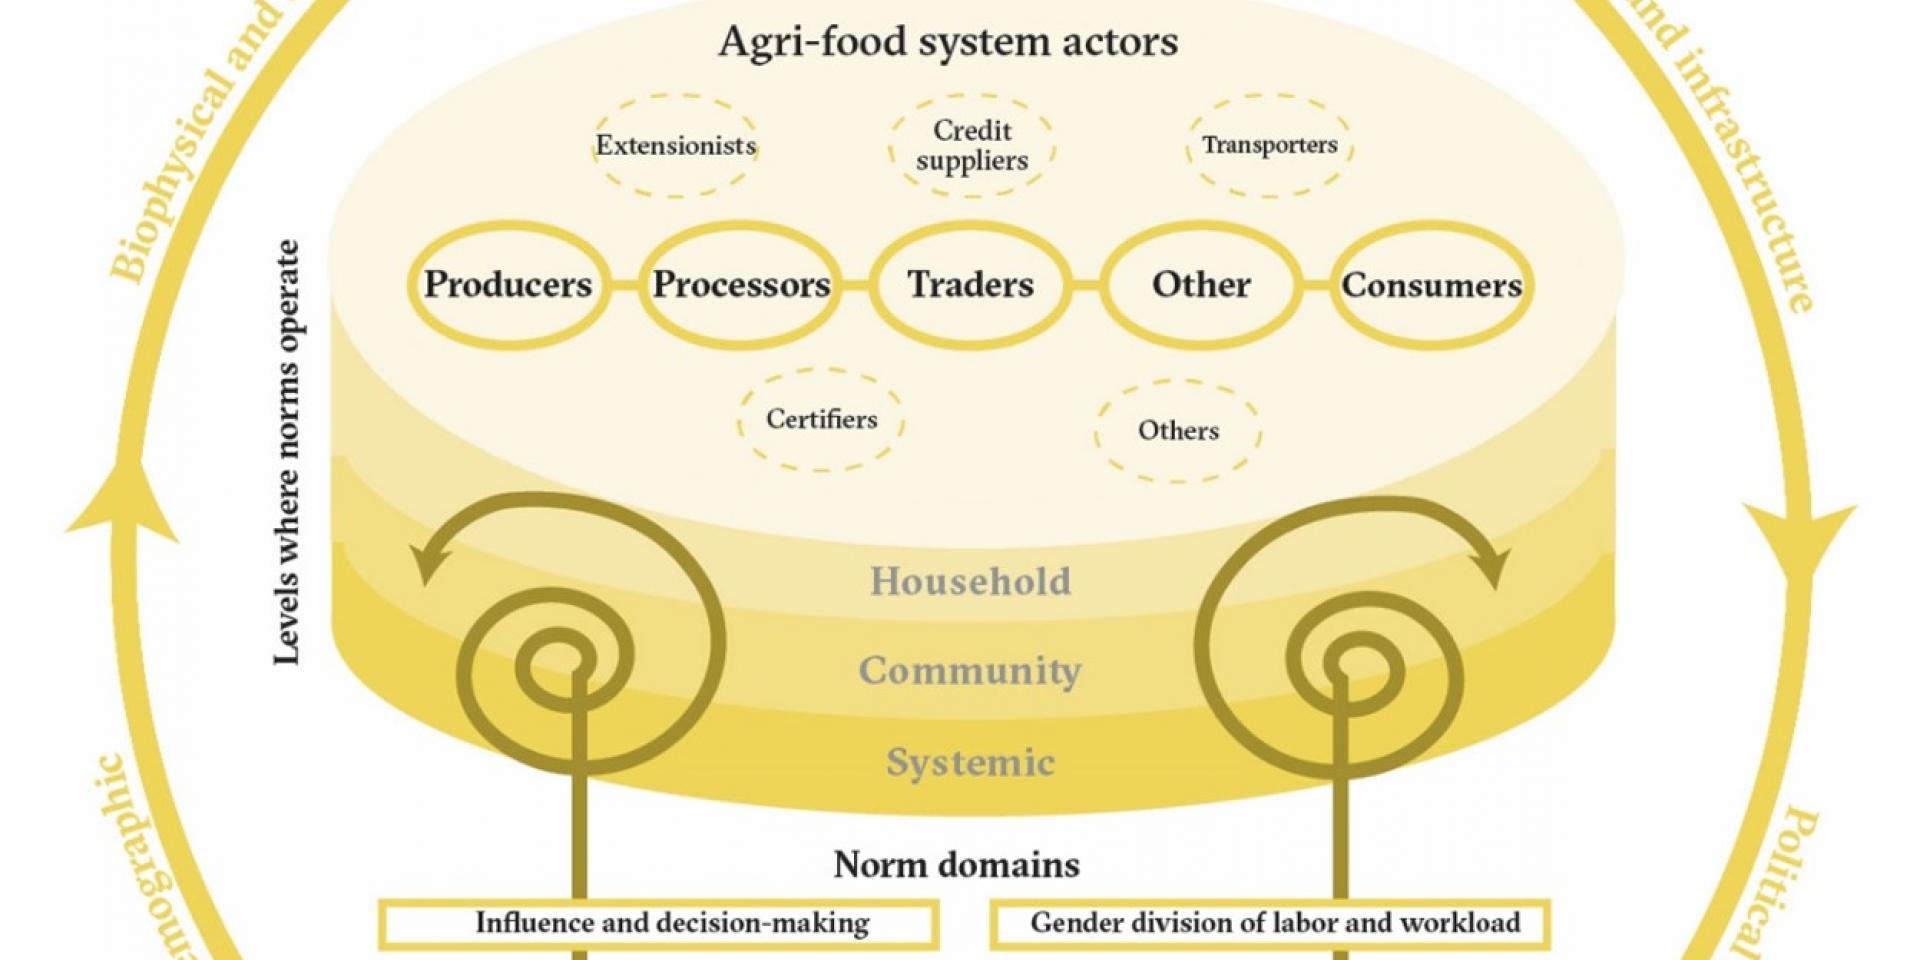 Social norms in agri-food systems